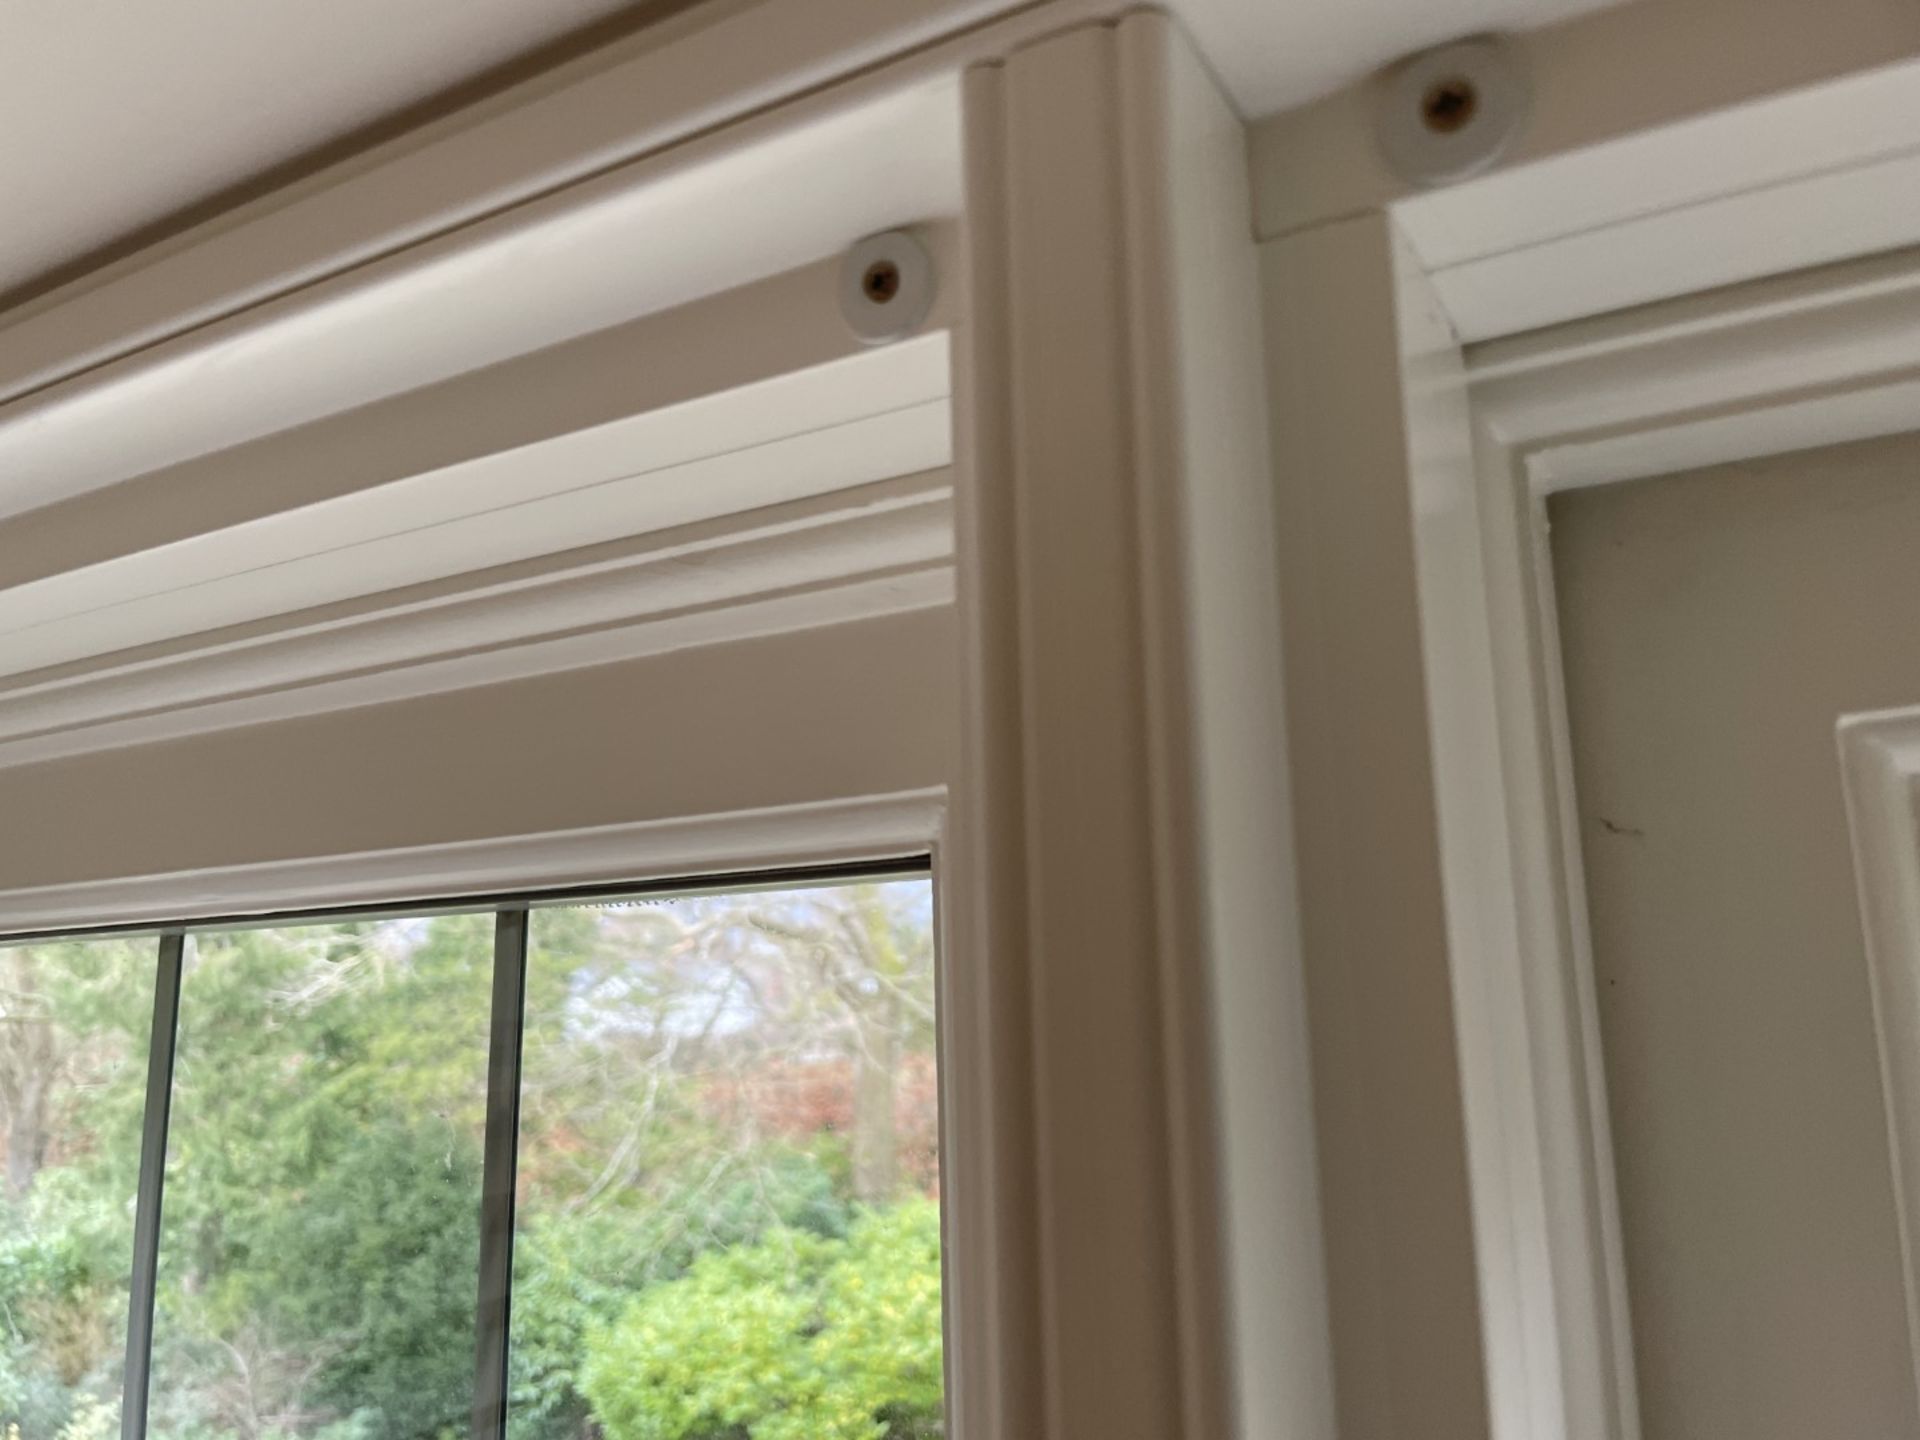 1 x Hardwood Timber Double Glazed Leaded 3-Pane Window Frame fitted with Shutter Blinds - Image 5 of 17